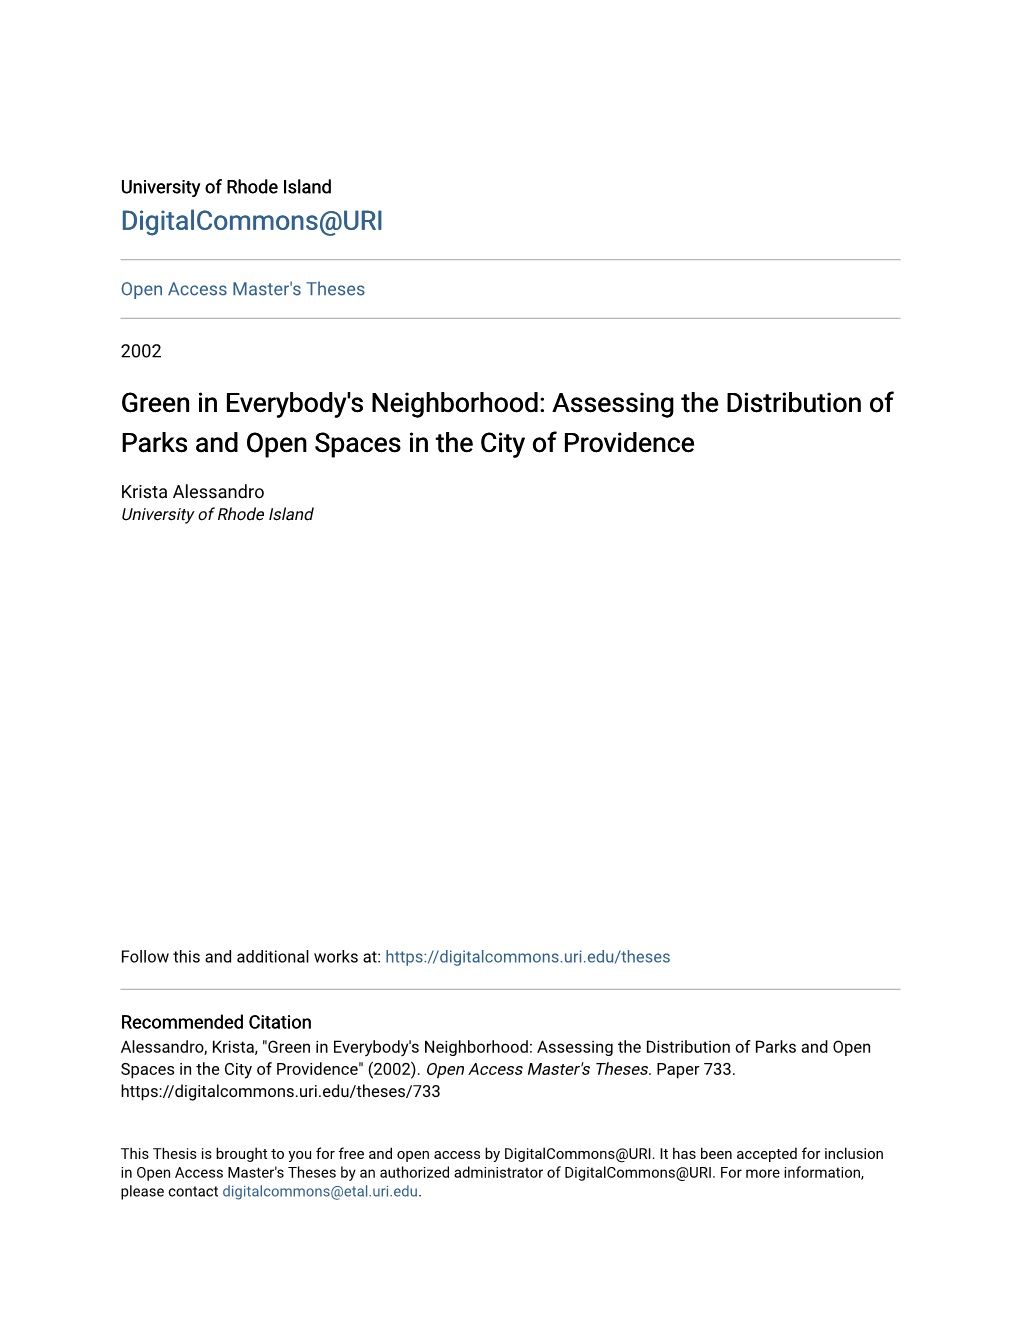 Assessing the Distribution of Parks and Open Spaces in the City of Providence